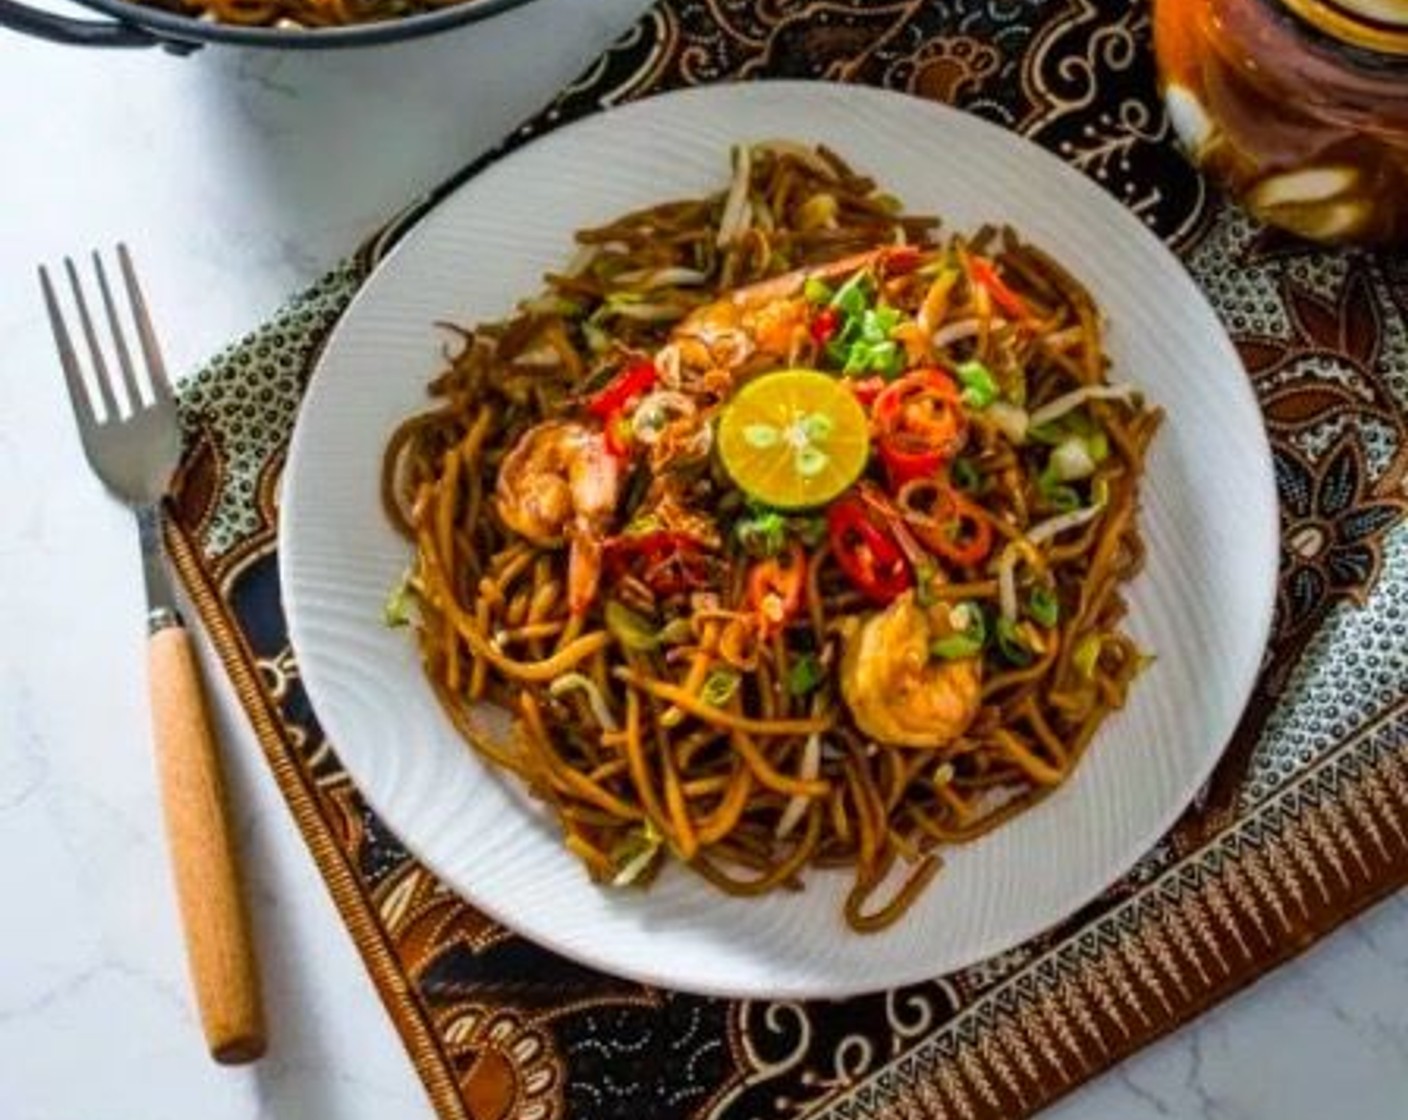 Mie Goreng (Indonesian Fried Noodles)